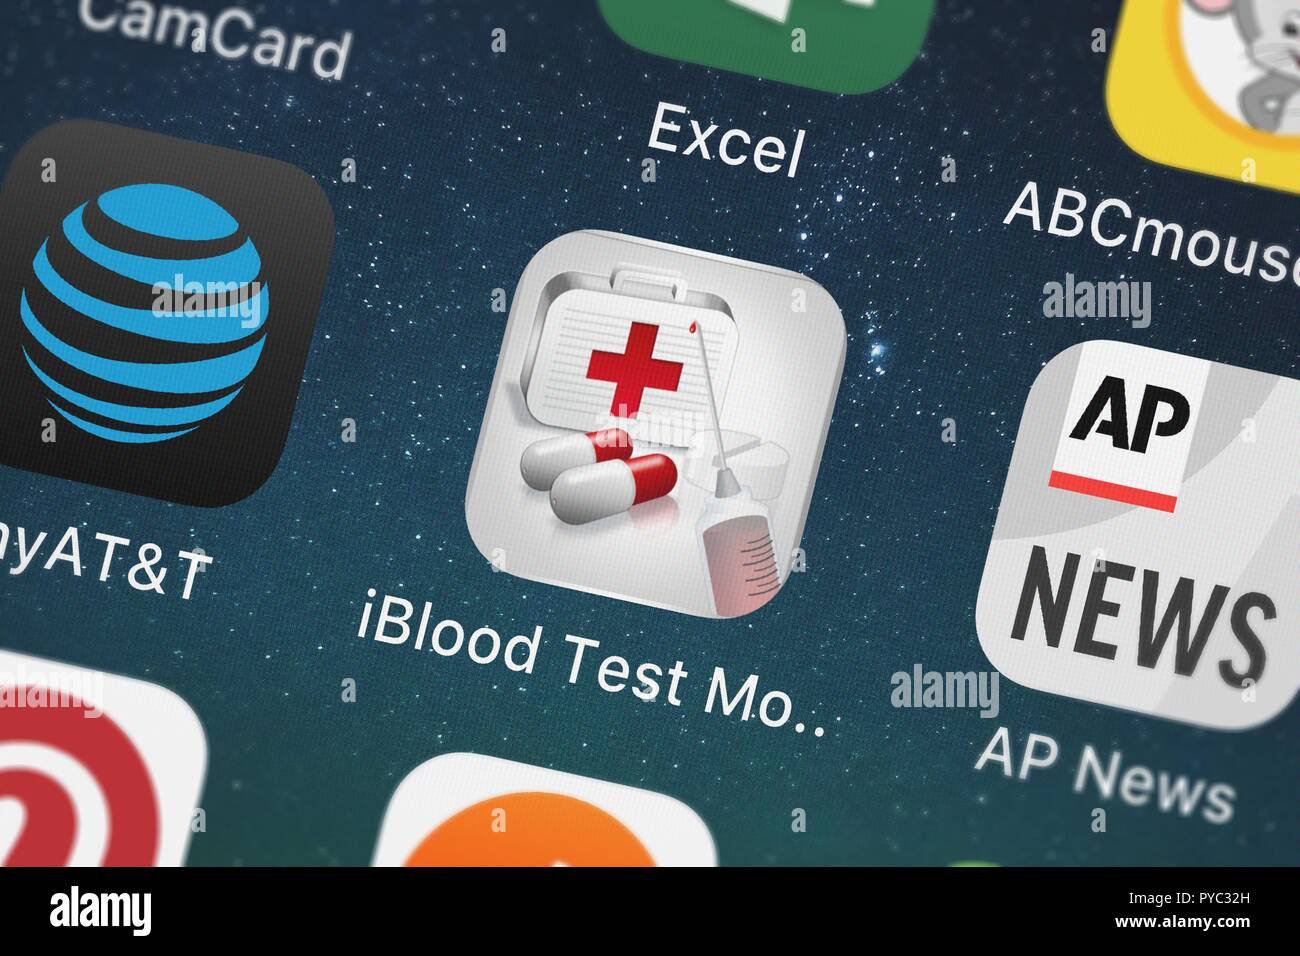 London, United Kingdom - October 26, 2018: Screenshot of the iBlood Test Monitor Lite mobile app from Pop-ok.com icon on an iPhone. Stock Photo